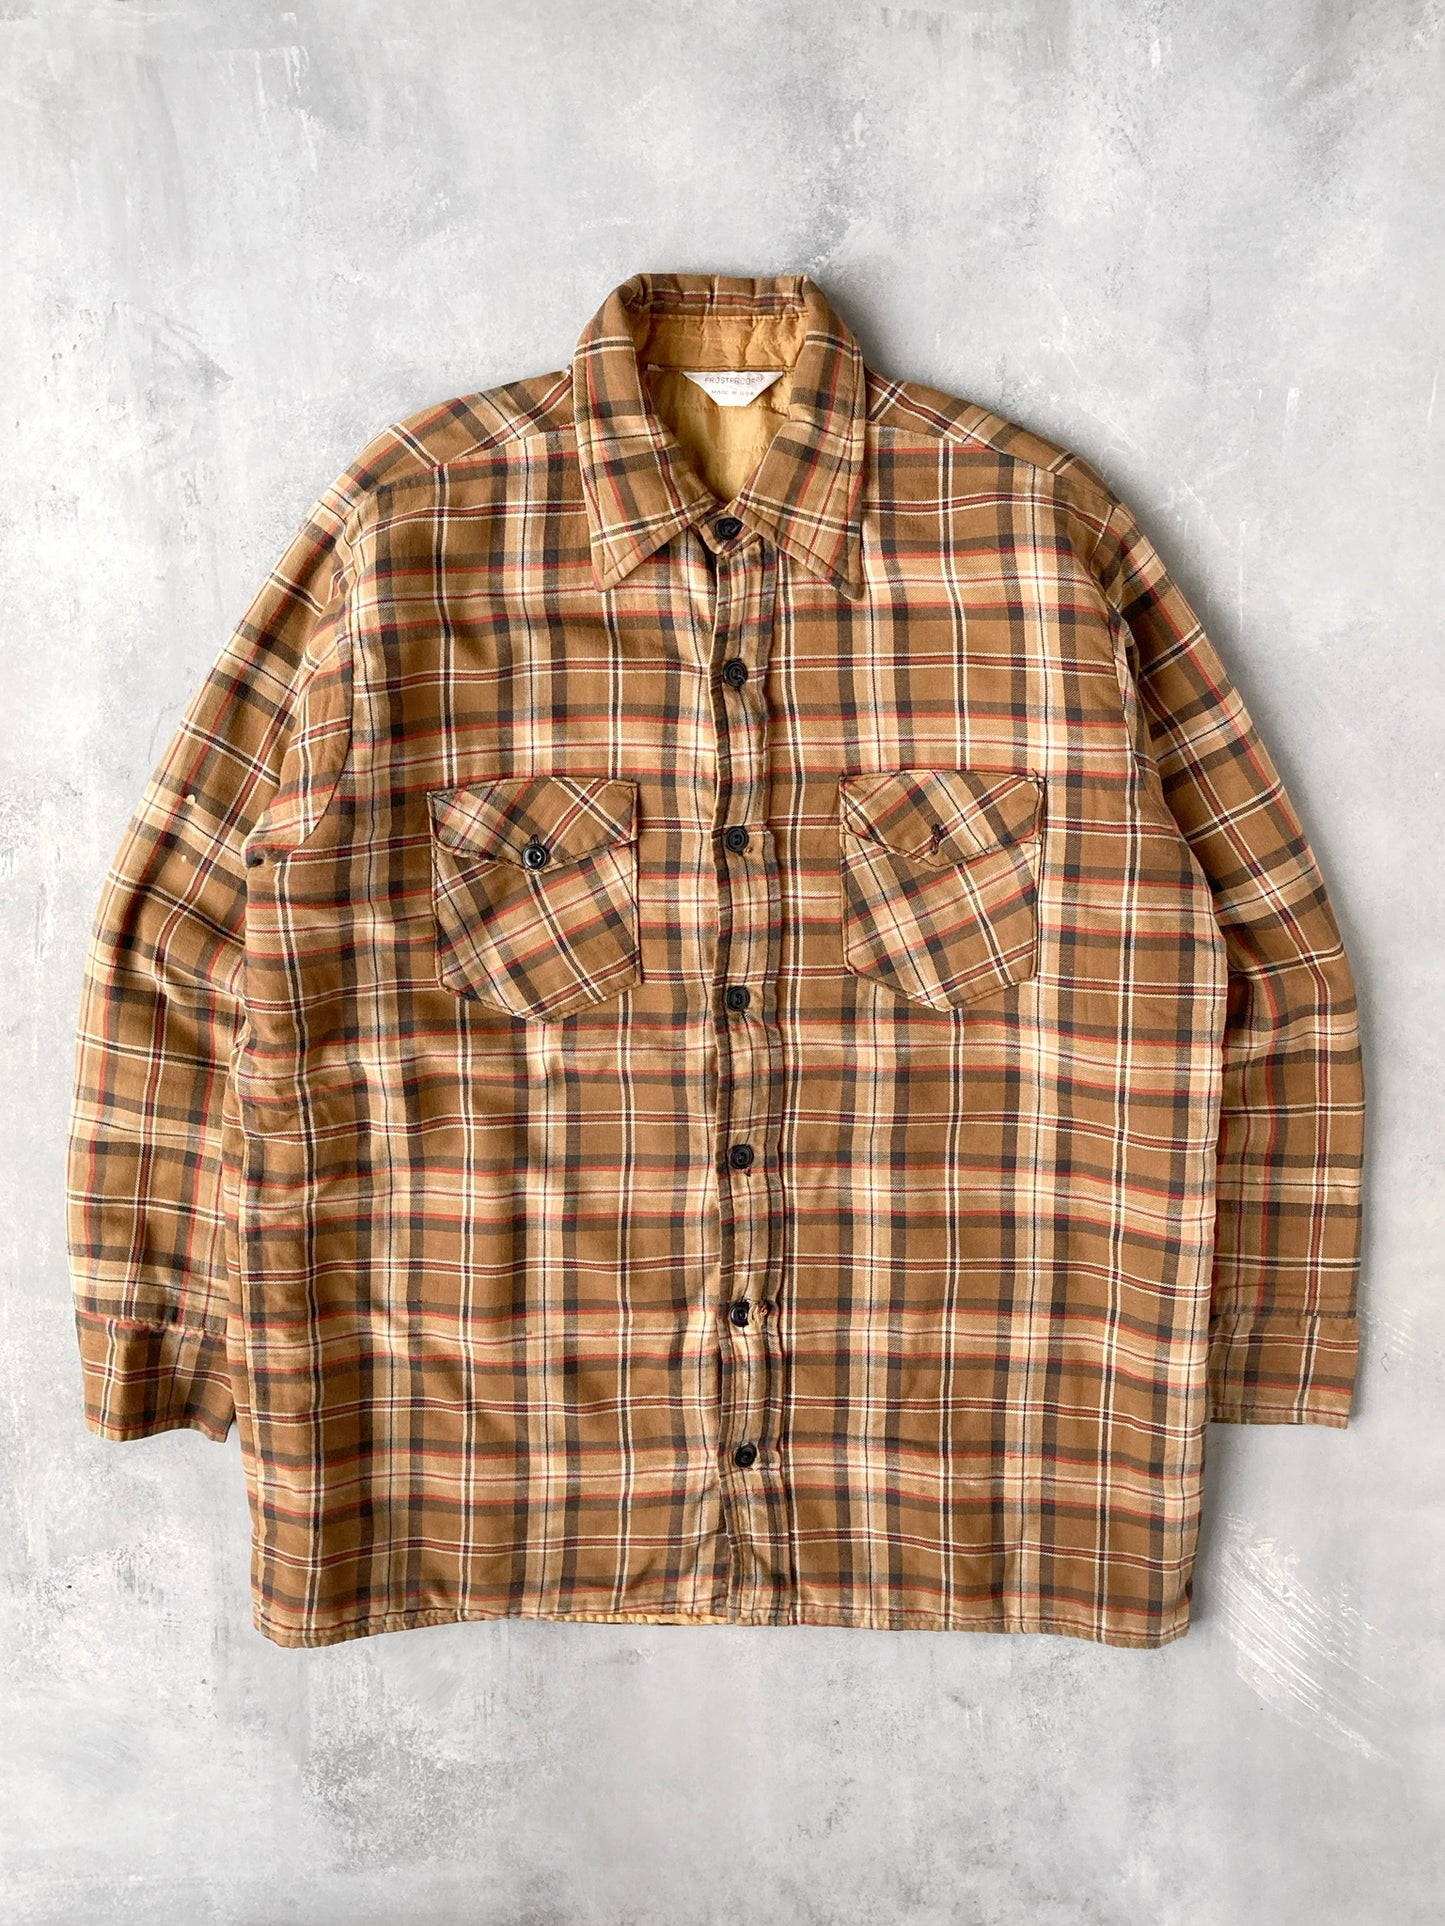 Insulated Flannel Shirt 70's - XL